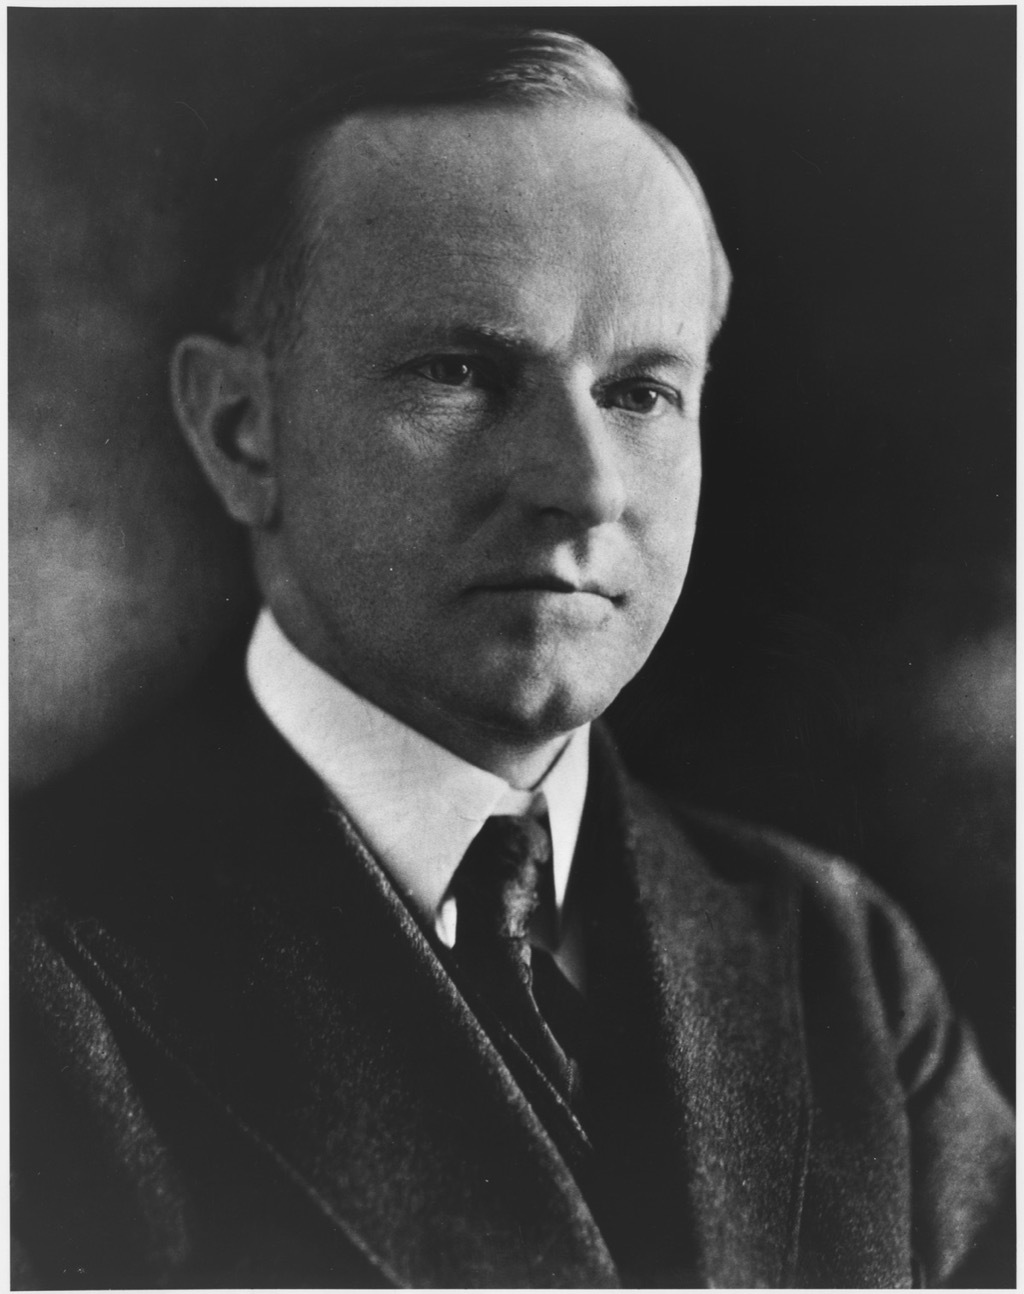 President Calvin Coolidge. Ca. 1923-1928. From 1907 to 1920, Coolidge worked his way up Massachusetts State politics to election as Governor in 1918.